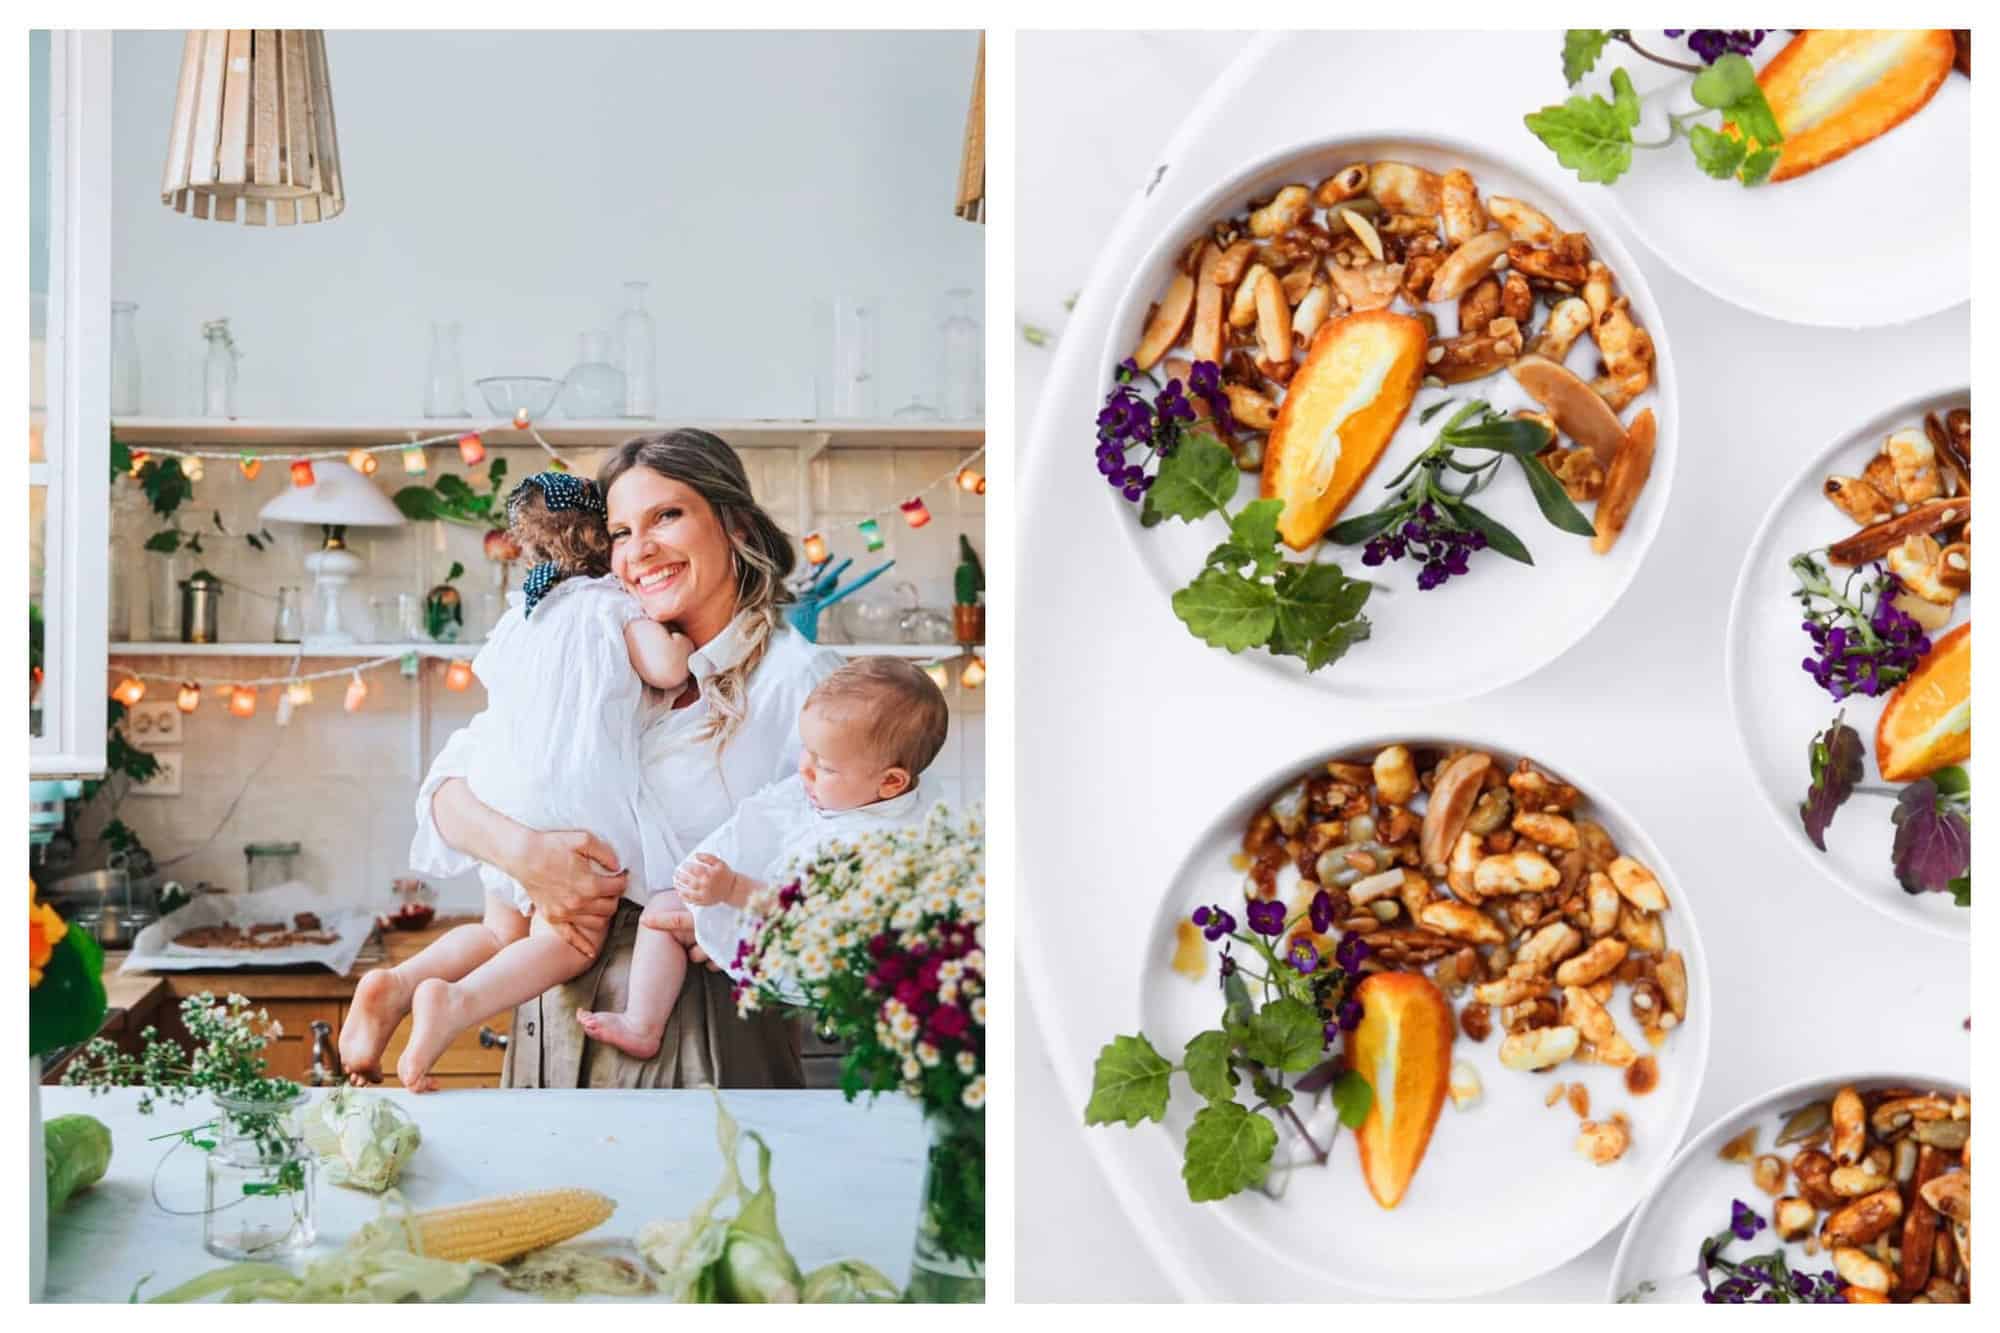 Left: A woman stands in a kitchen, holding two young children. The children aren’t looking at the camera but the woman is, and she’s smiling. Right: Six bowls are pictured filled with yogurt, nuts, and a variety of garnishes. 